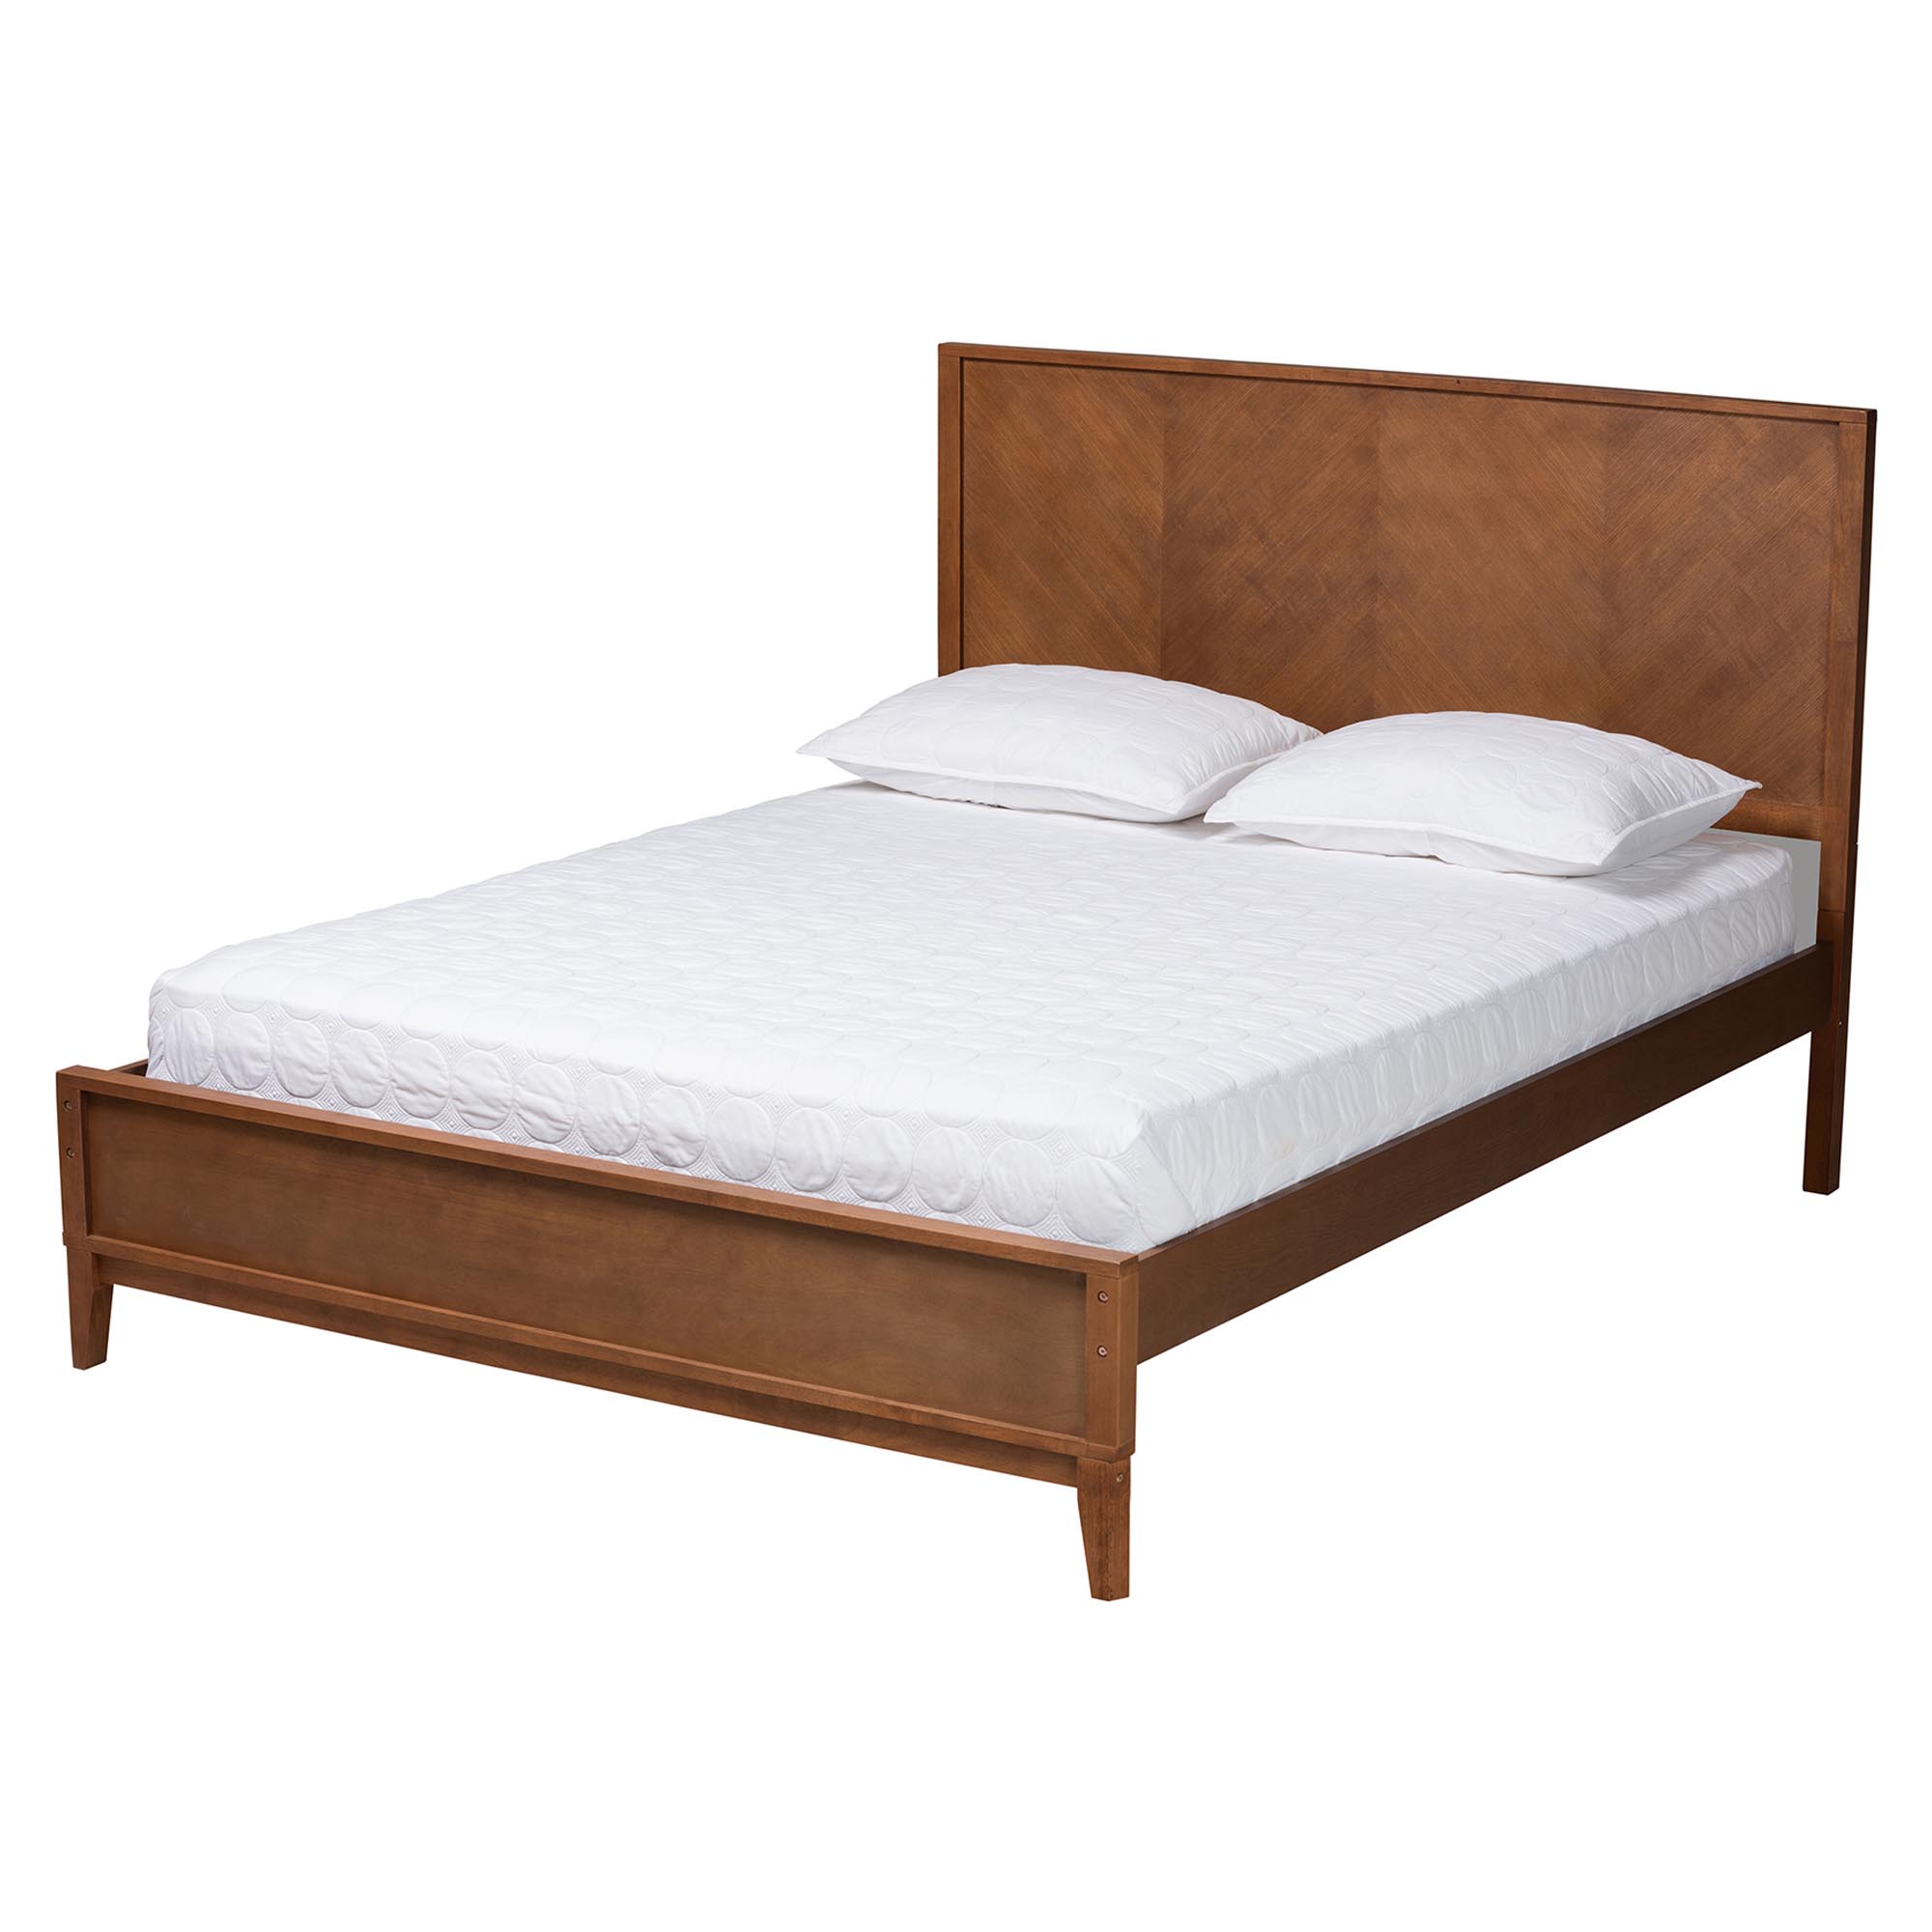 Baxton Studio Carver Classic Transitional Ash Walnut Finished Wood Queen Size Platform Bed